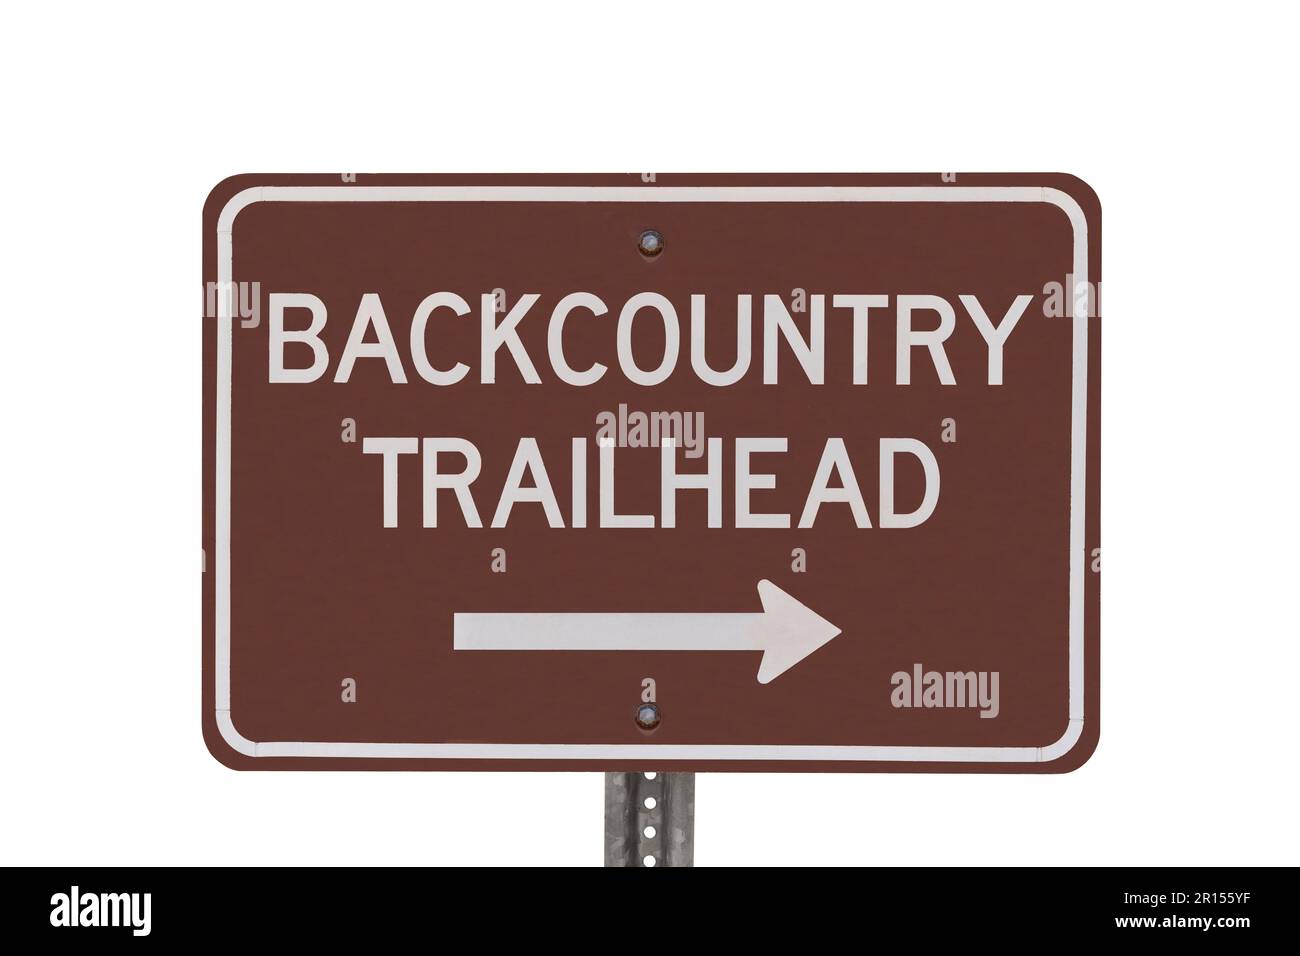 Backcountry trailhead sign isolated with cut out background Stock Photo